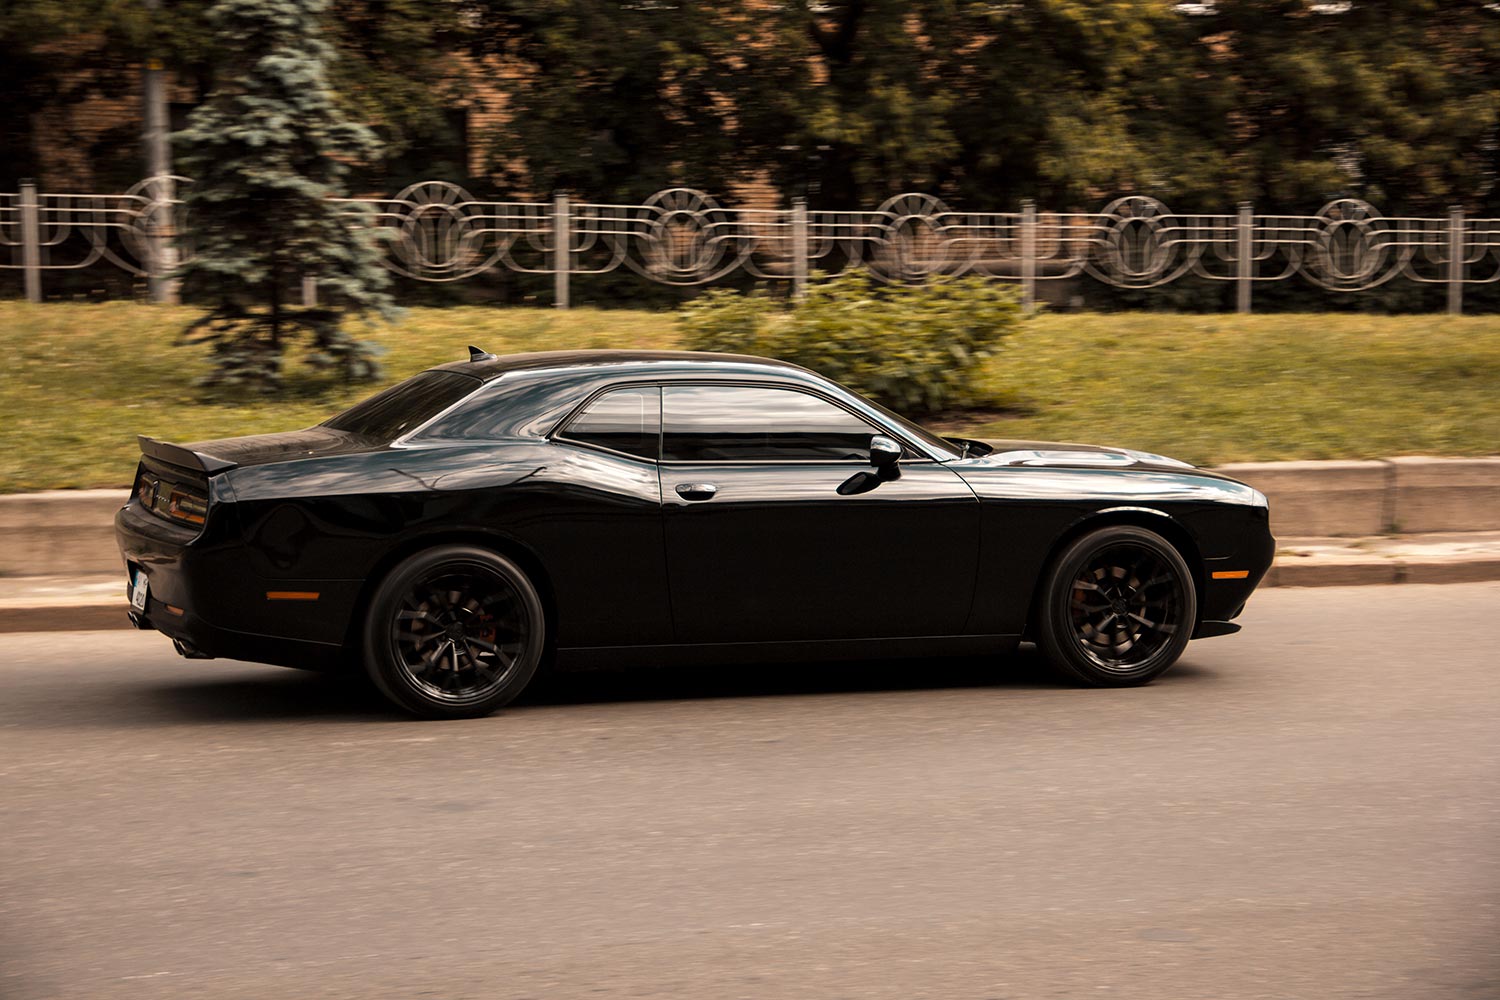 Black muscle car Dodge Challenger on the road